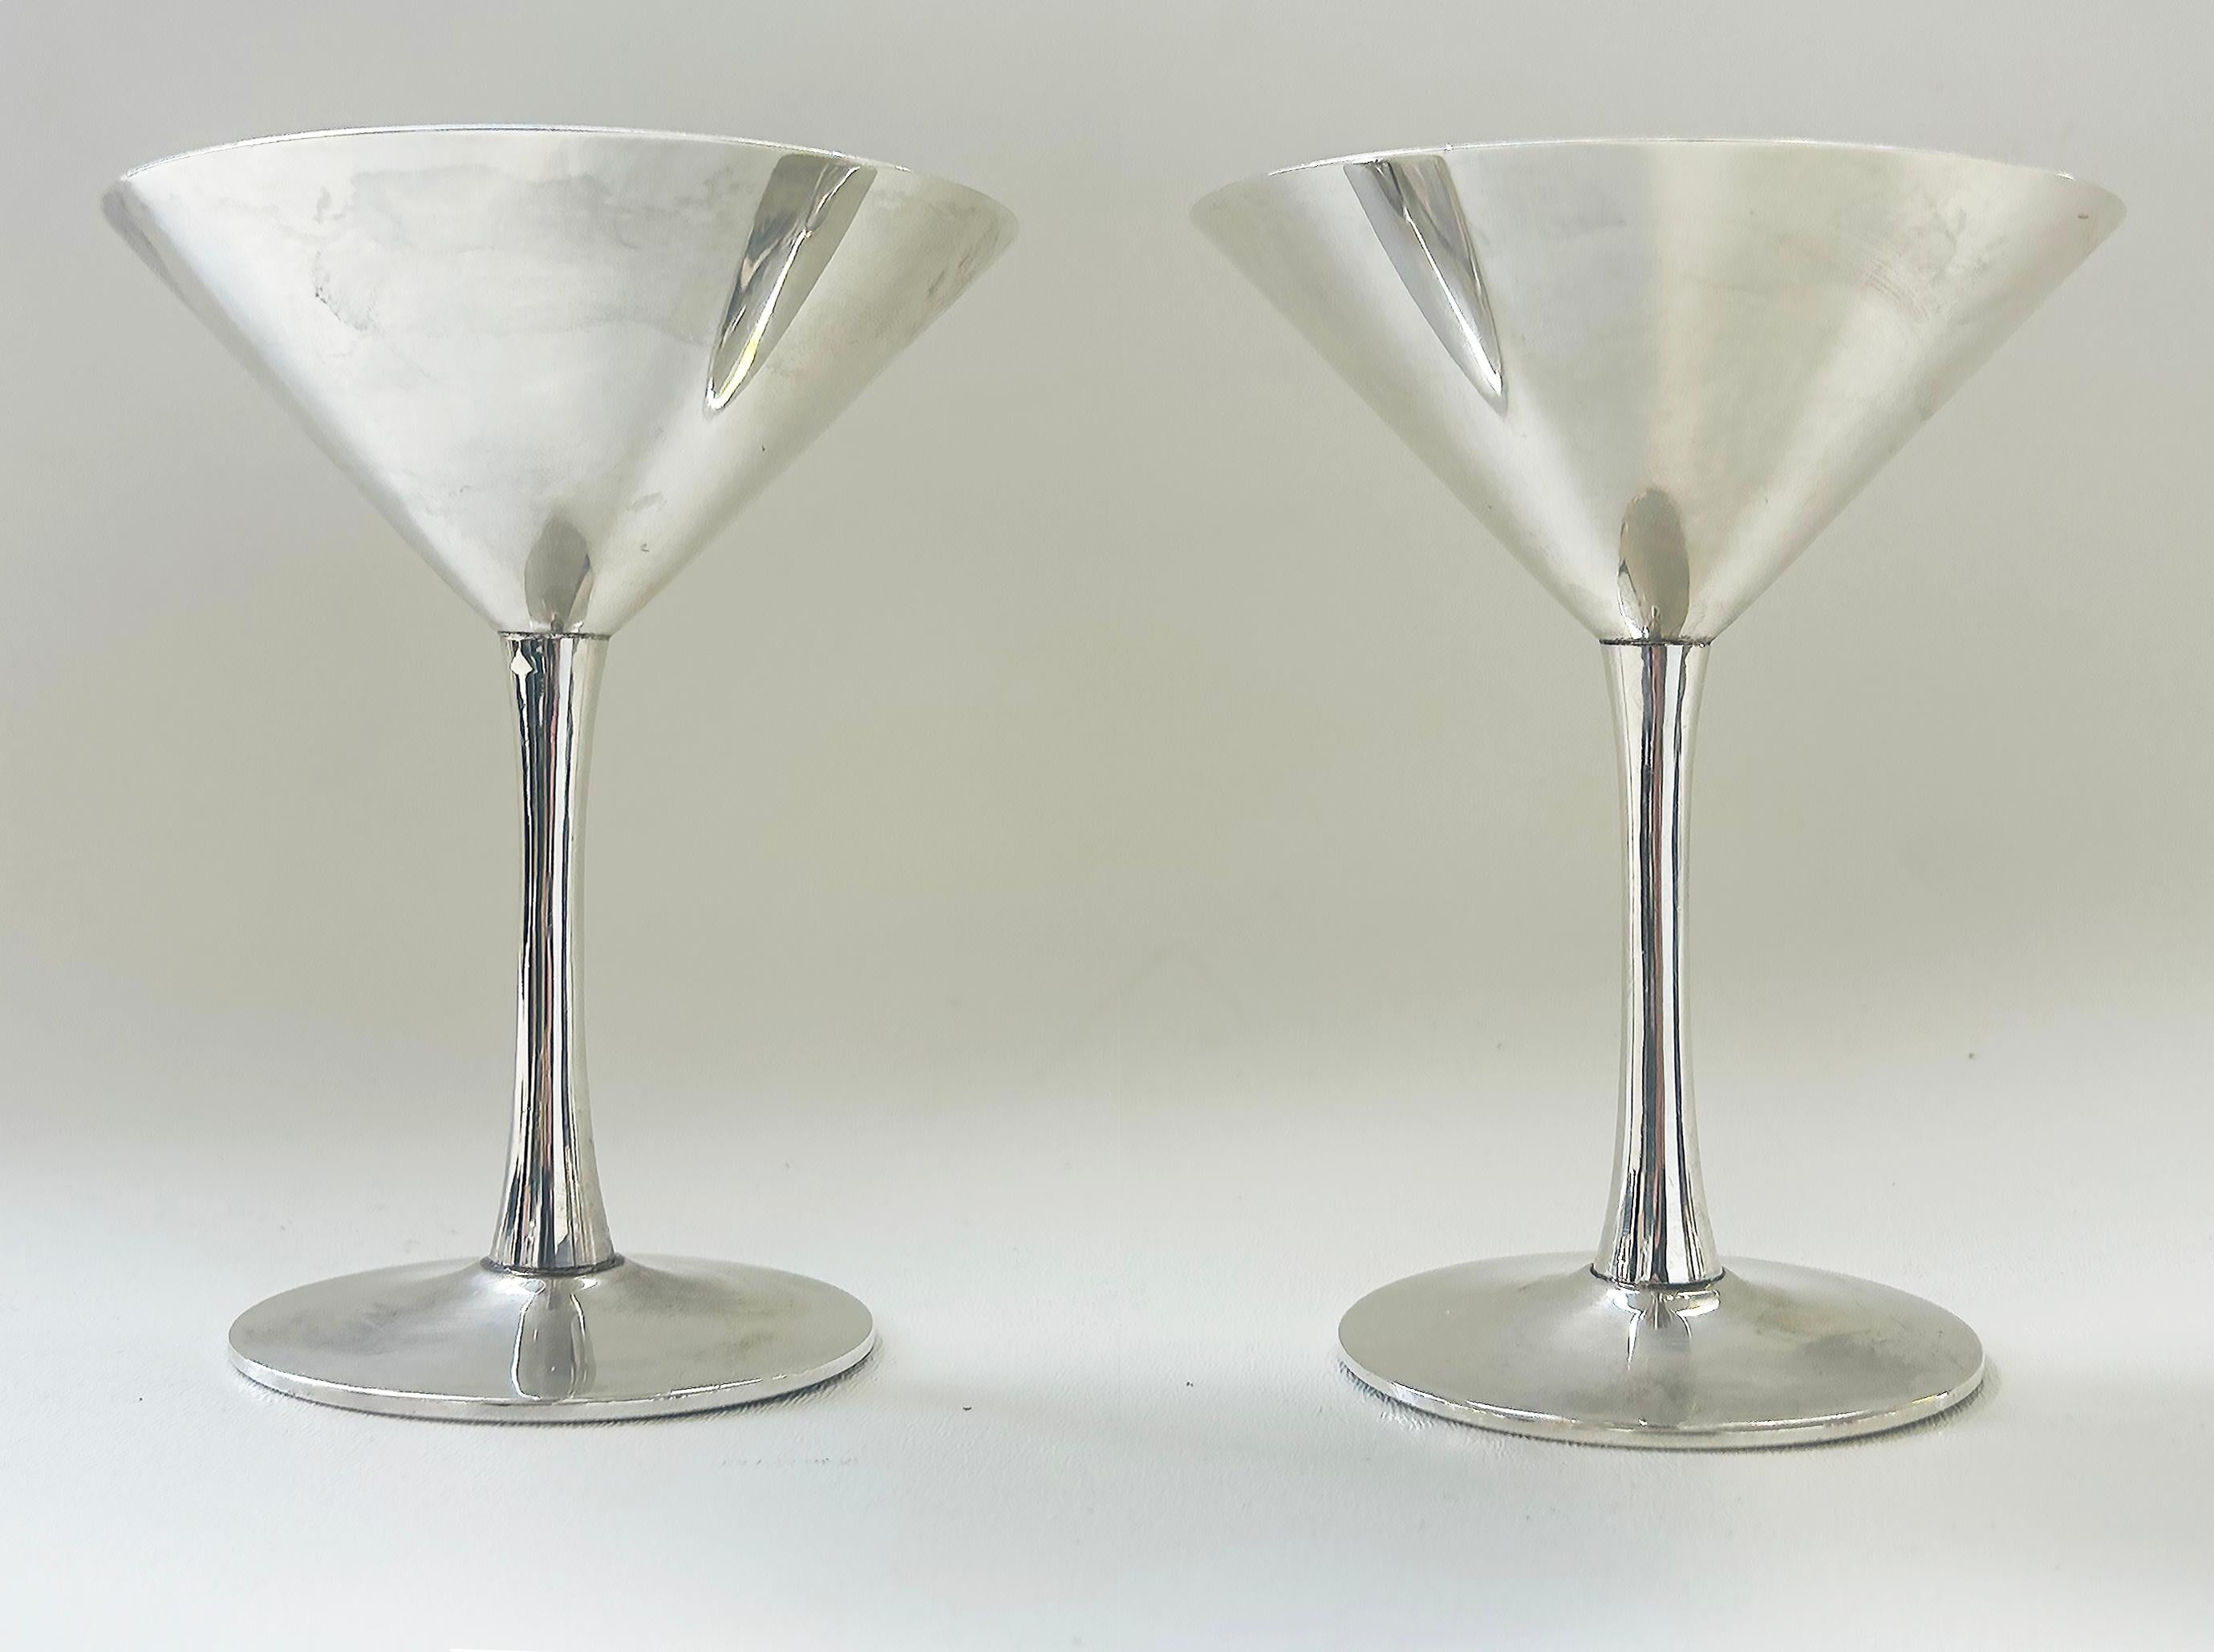 Cartier France Stamped 925 Sterling Silver Martini Goblets,  A Pair In Good Condition For Sale In Miami, FL